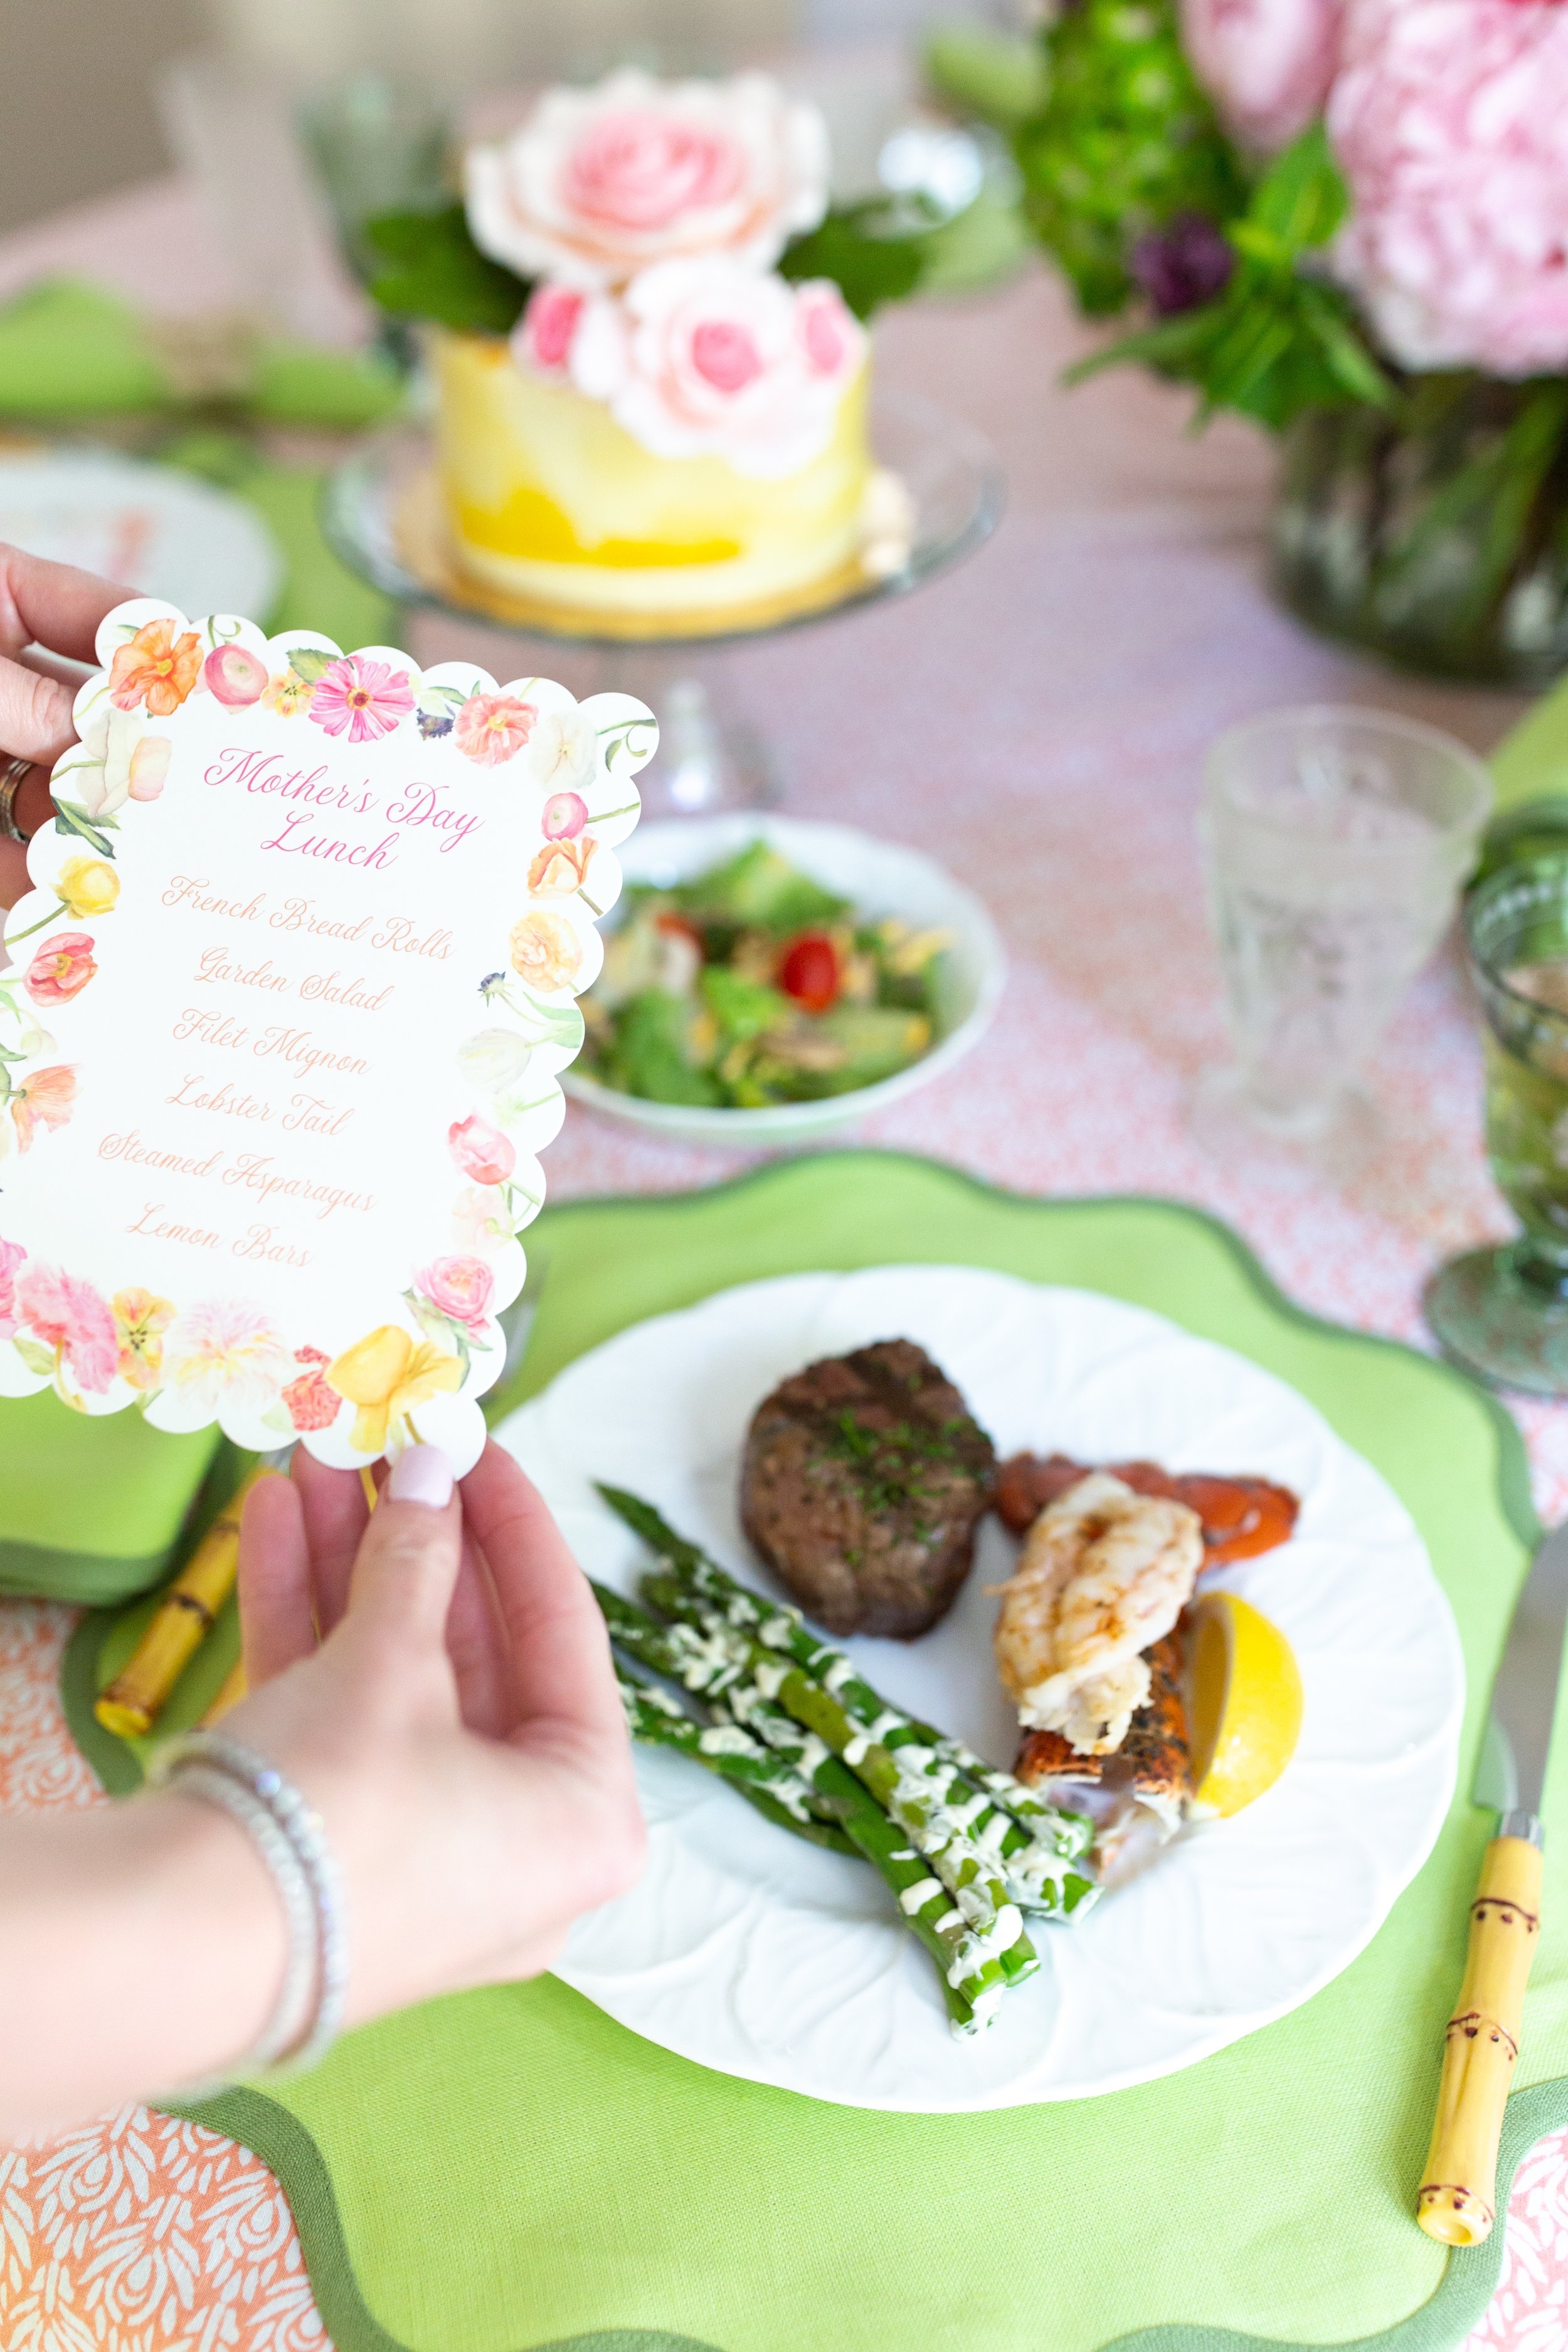 Mother's Day Lunch with Custom Lunch Menus designed by CoCo Zentner featured by Darby Fallon Clark.jpg